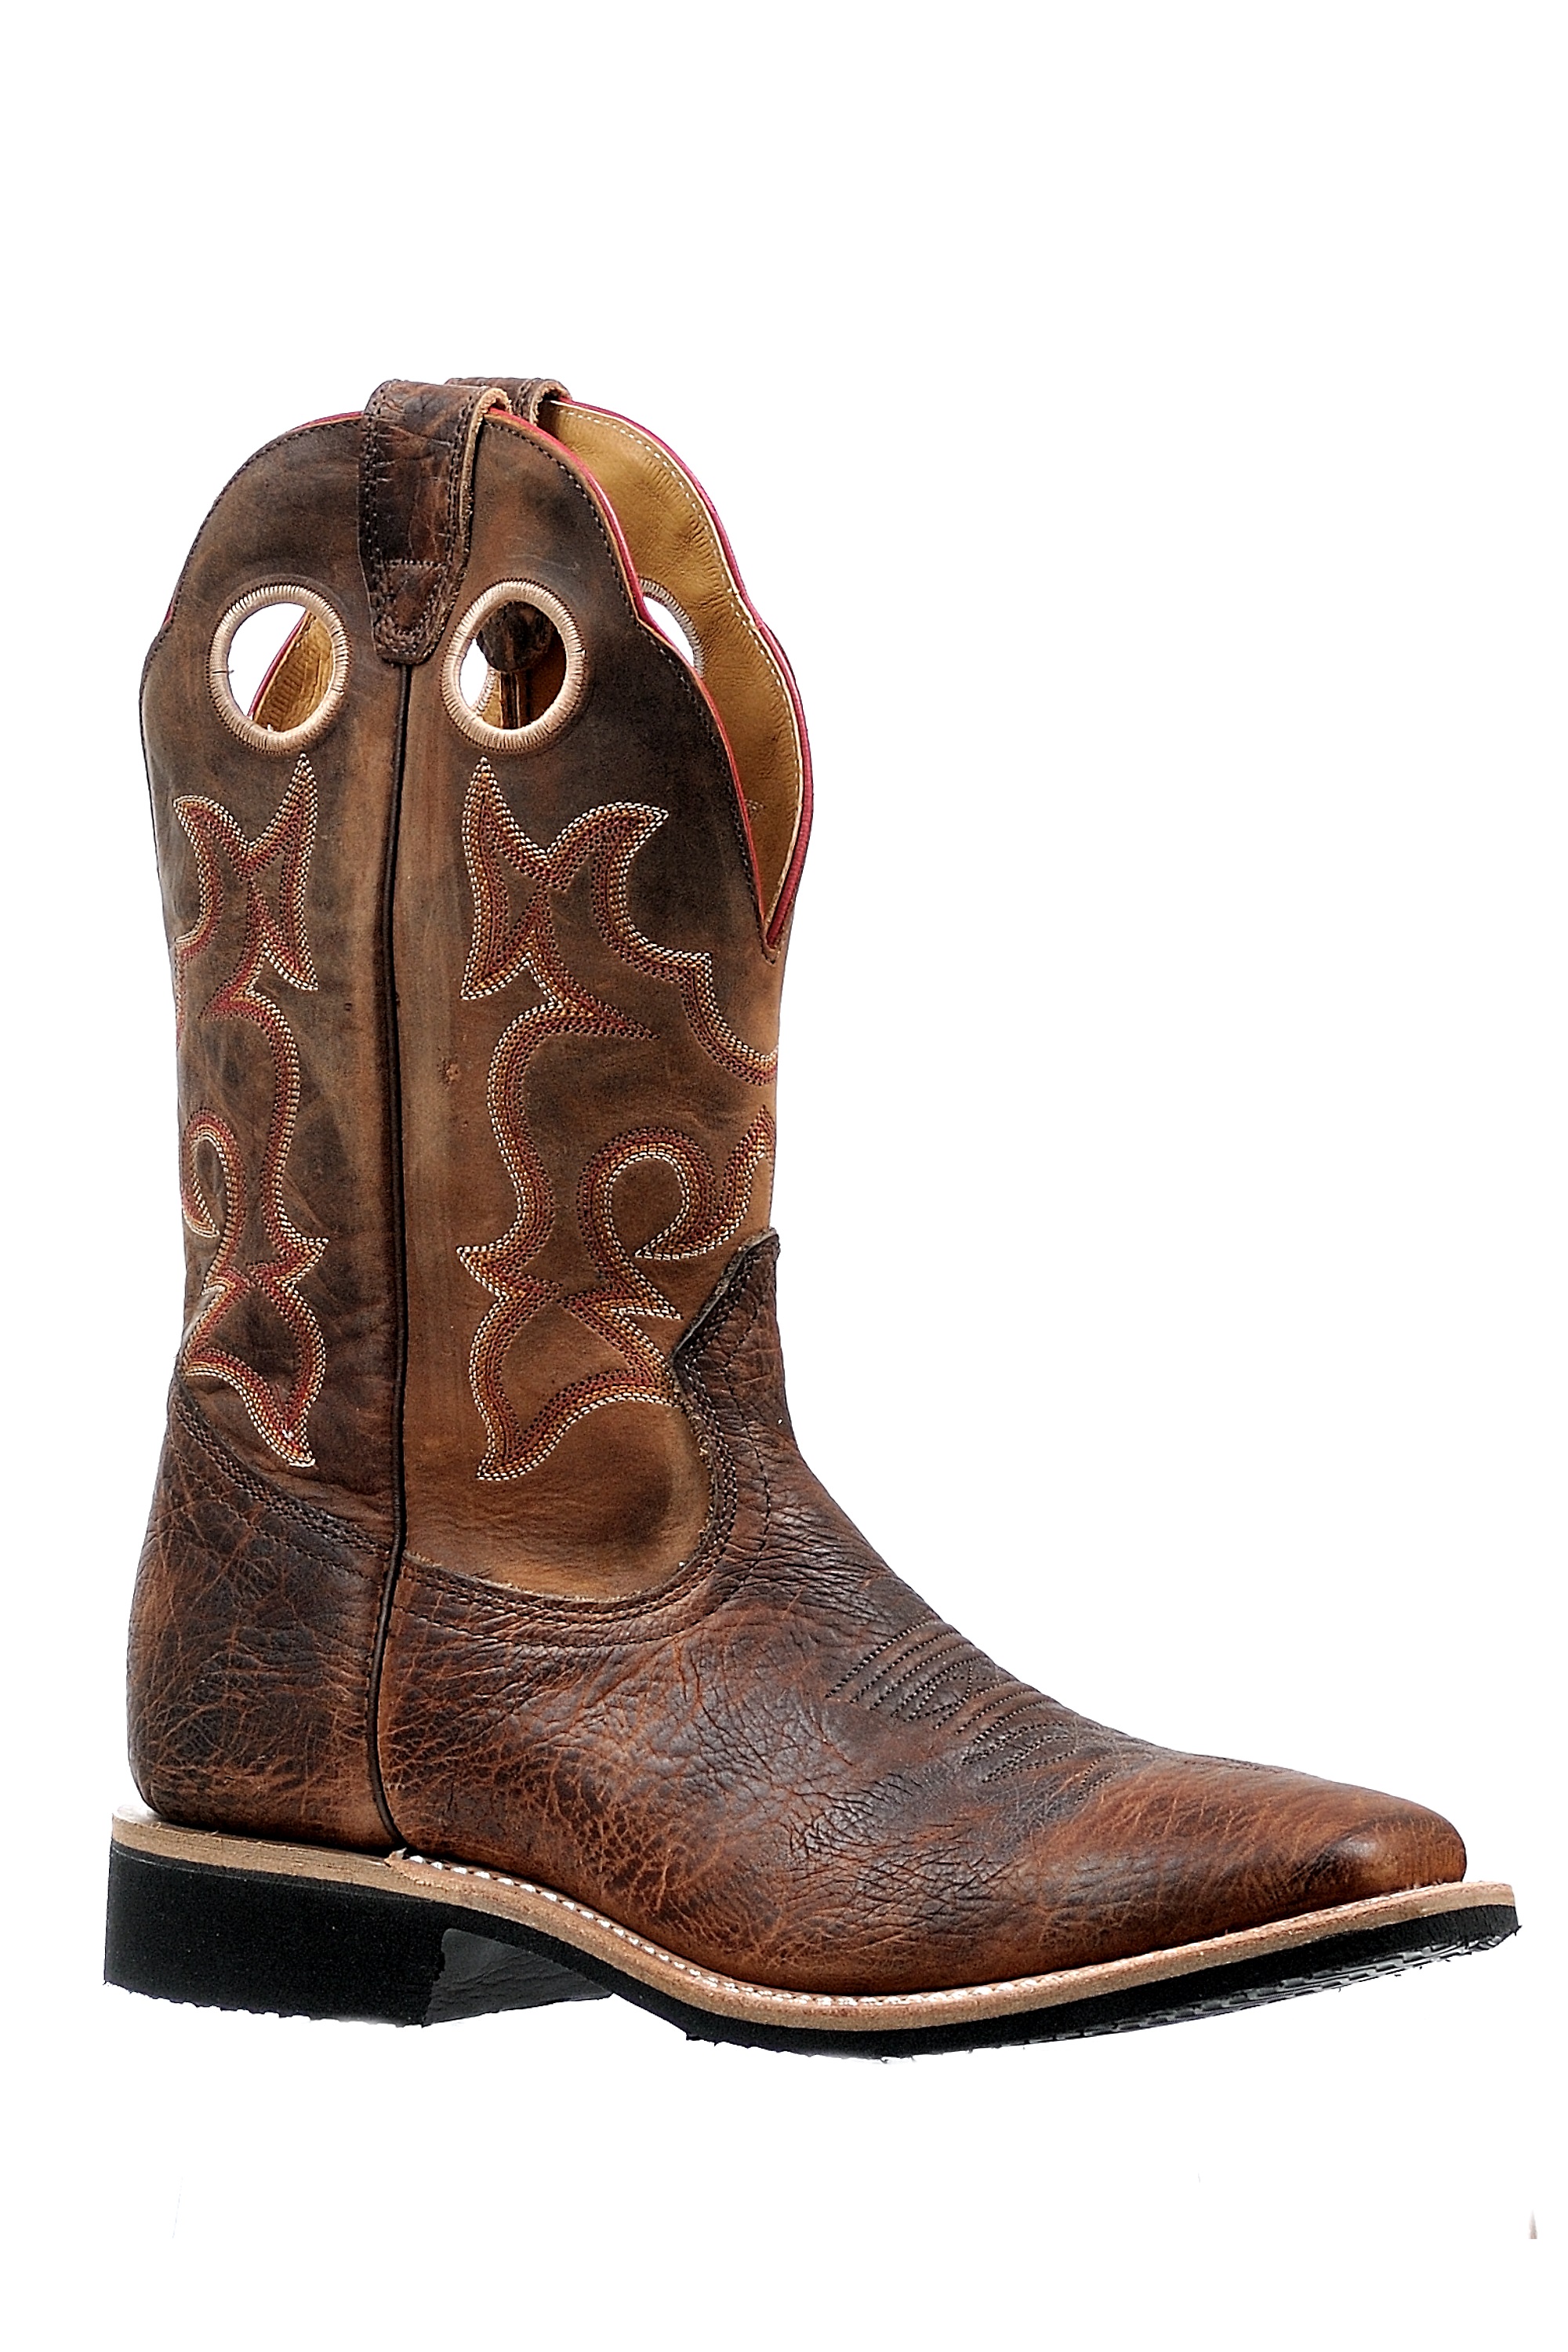 Boulet Extralight LaidBack Tan Spice Mens Wide Square Toe boot 4745